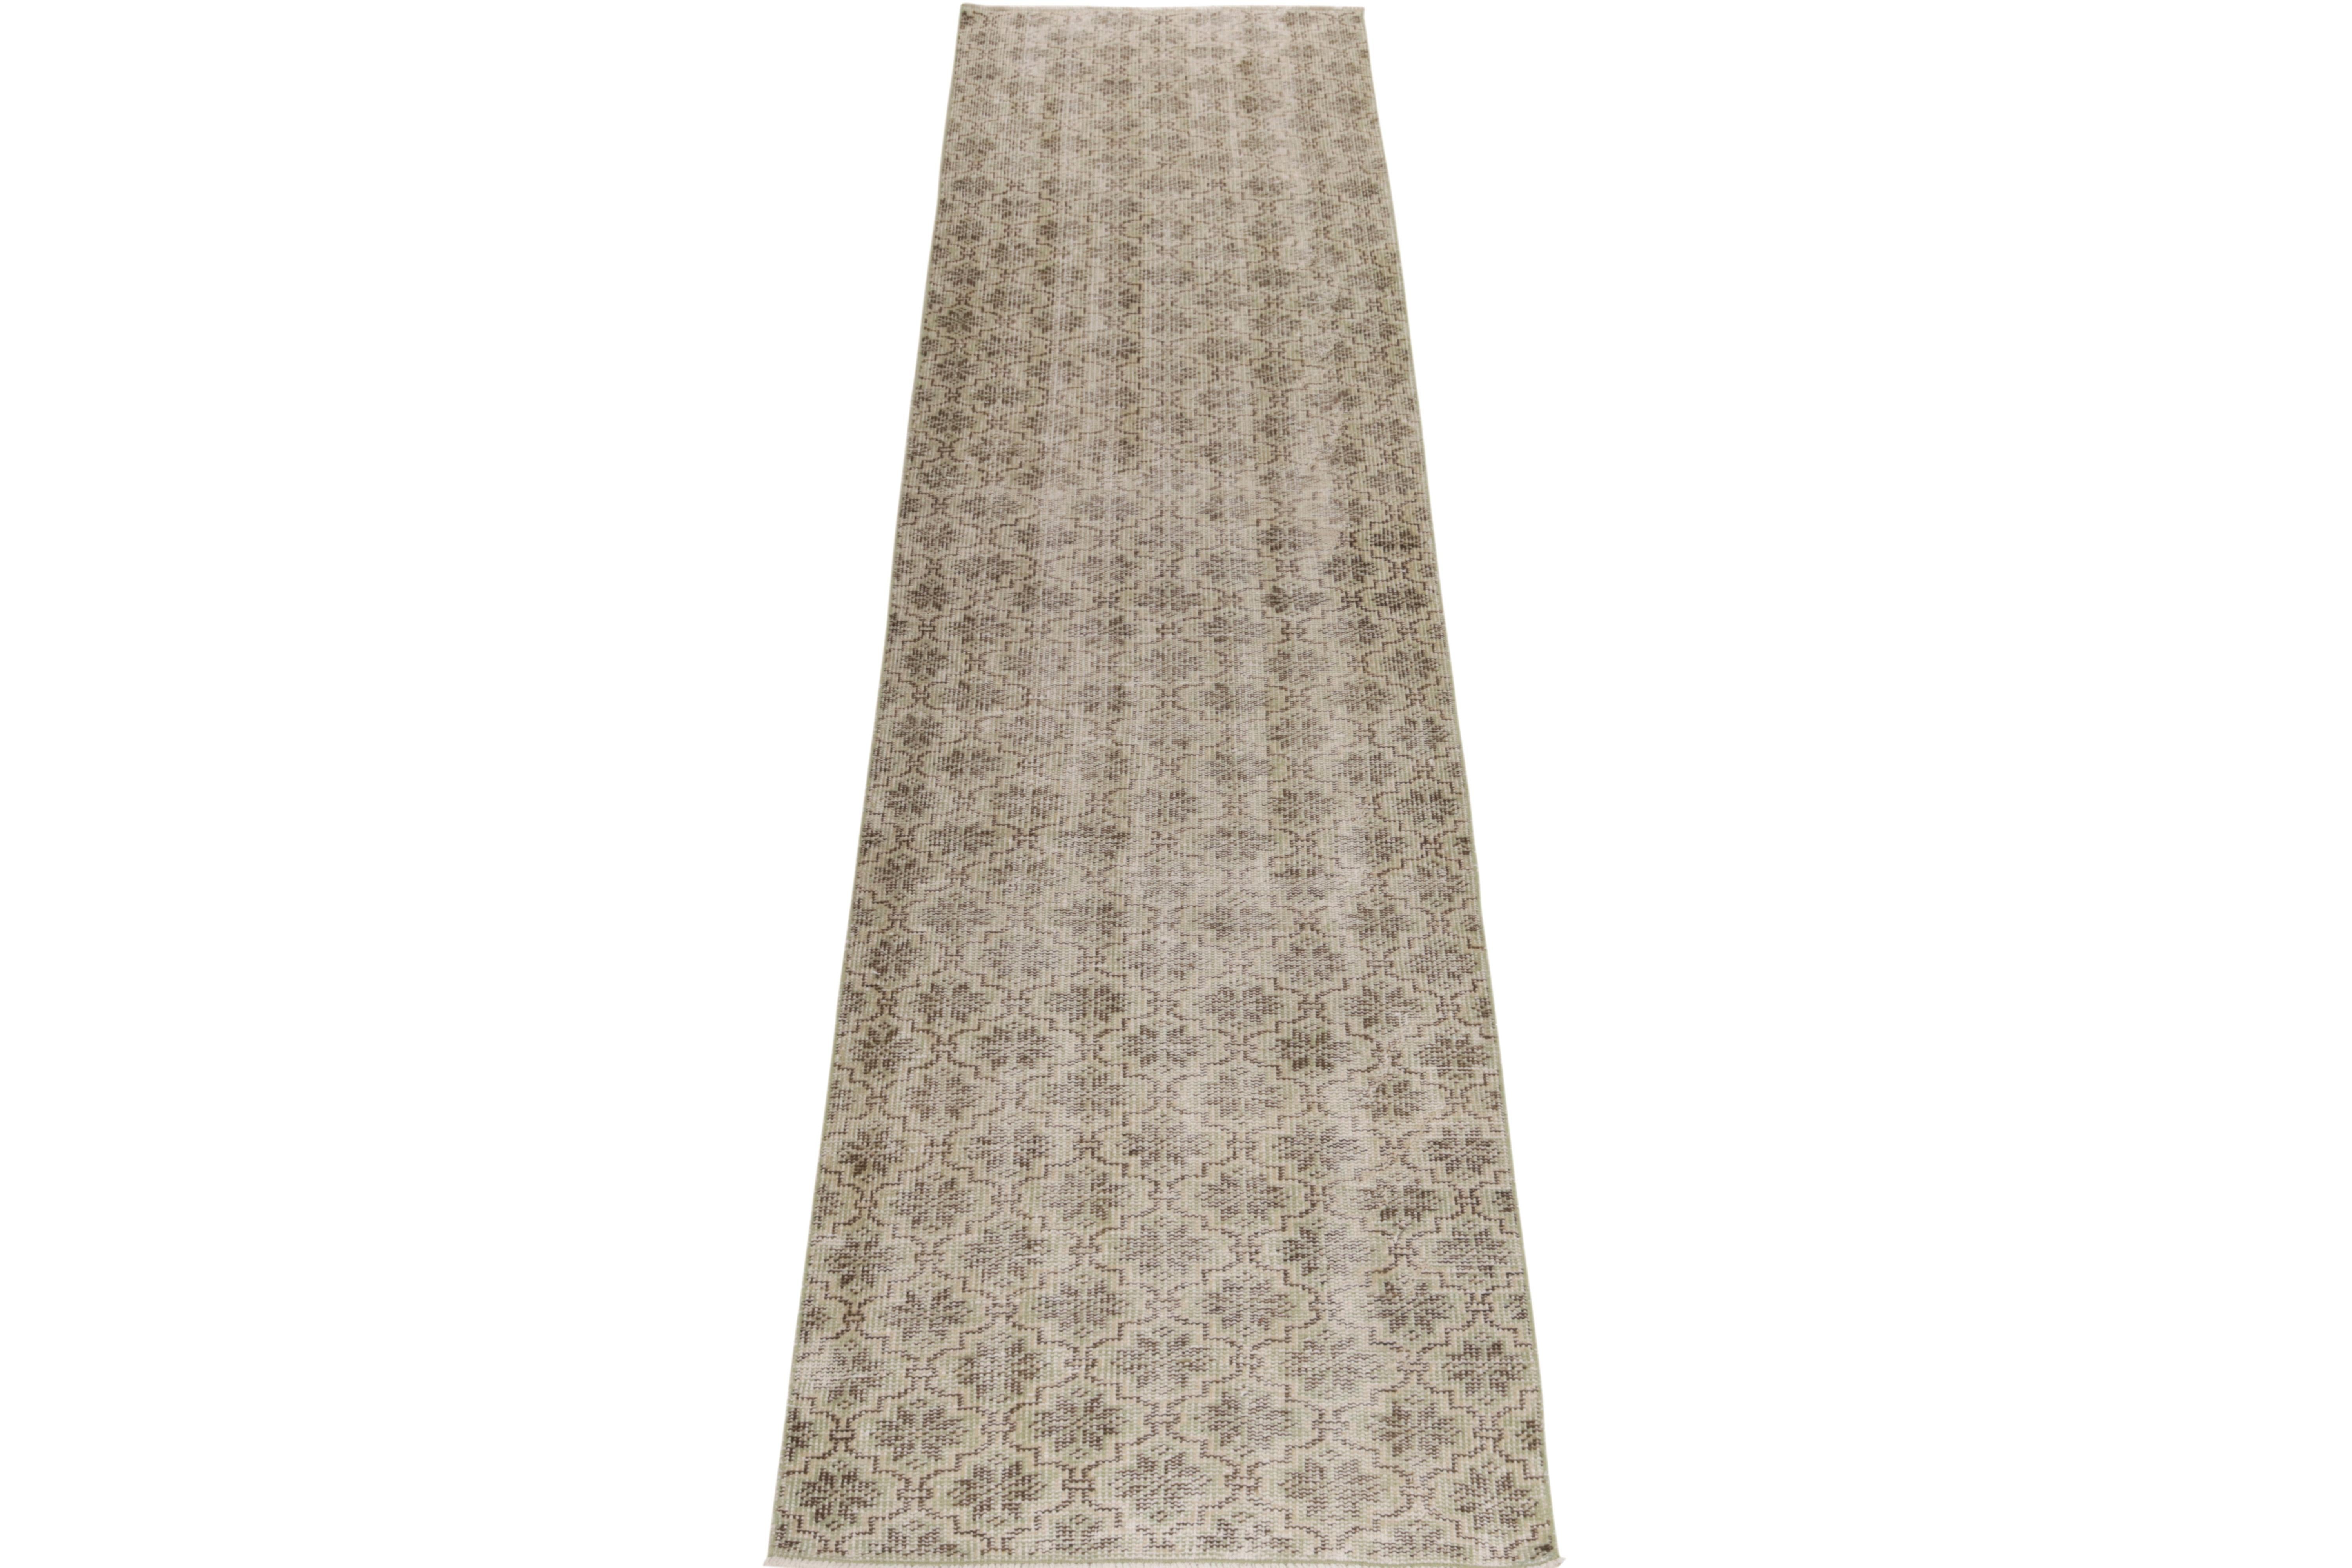 From Rug & Kilim’s commemorative mid-century Pasha collection, a 1960s vintage rug among the rare works of a Bold designer from Turkey. 

Hand-knotted in wool, this 2x11 runner enjoys an all over floral geometric pattern in pale green & beige